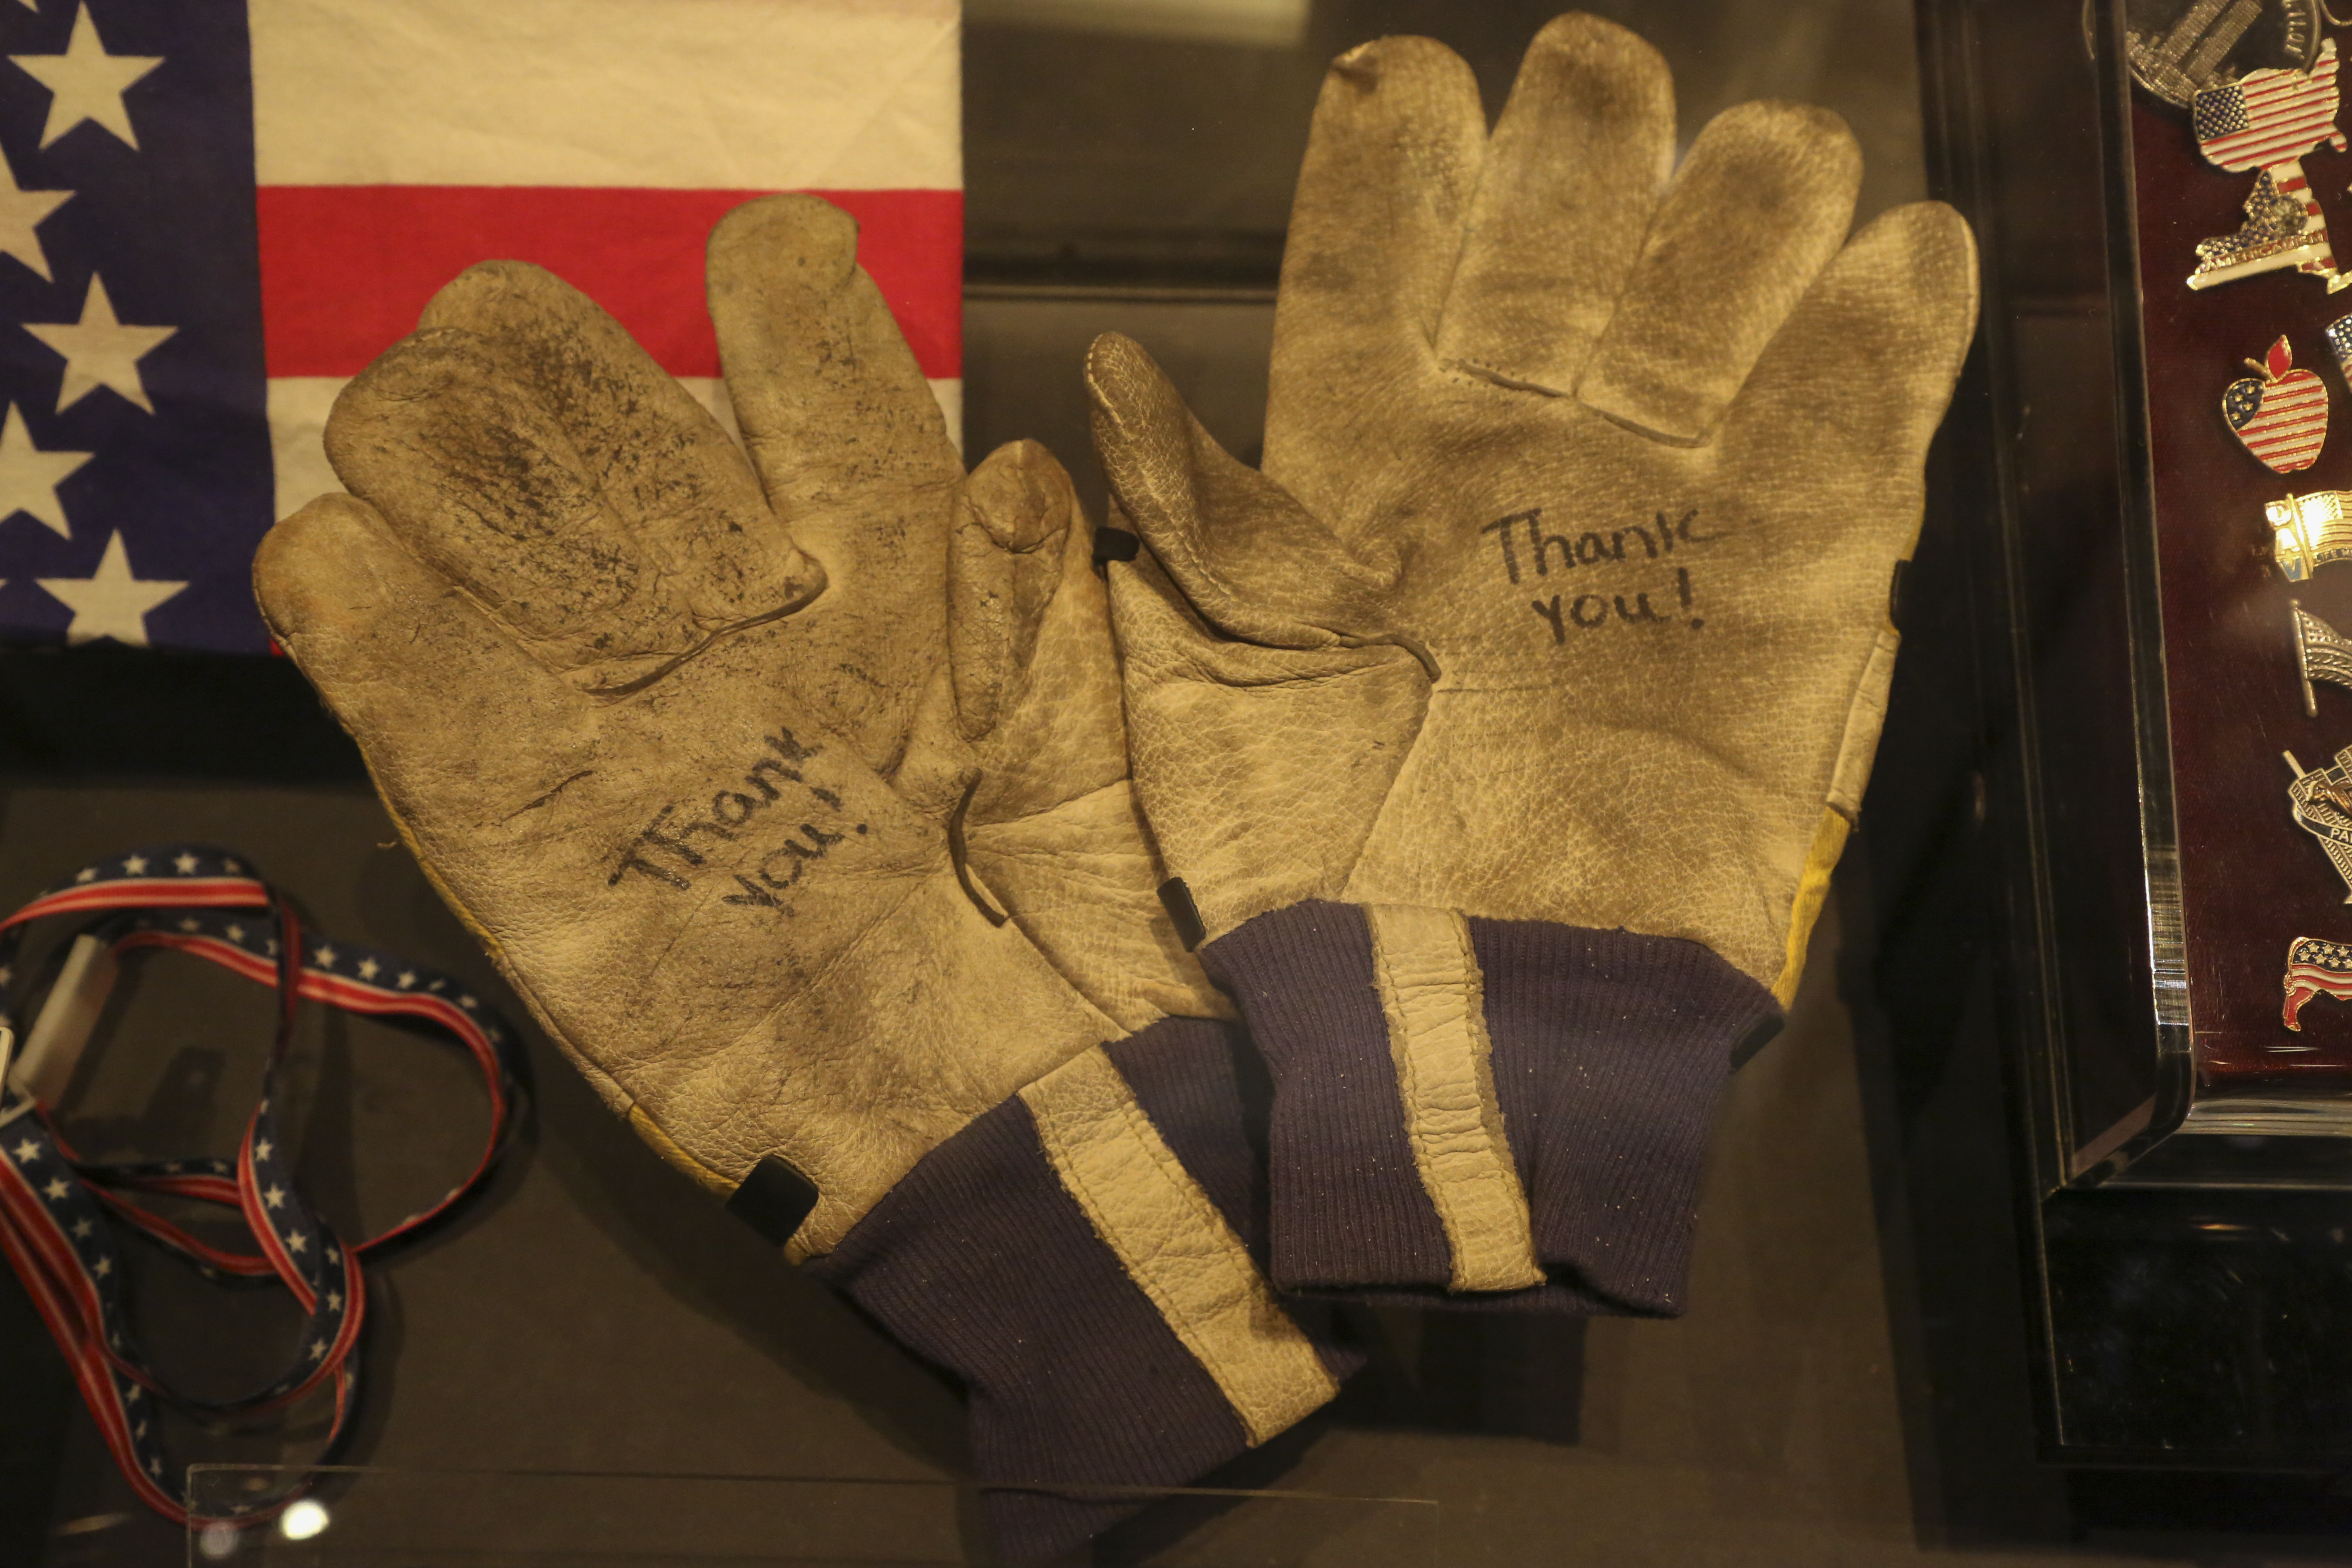 Two gloves belonging to NYPD officer David Brink are displayed at the Museum. The works “Thank You” have been written on both gloves in marker.